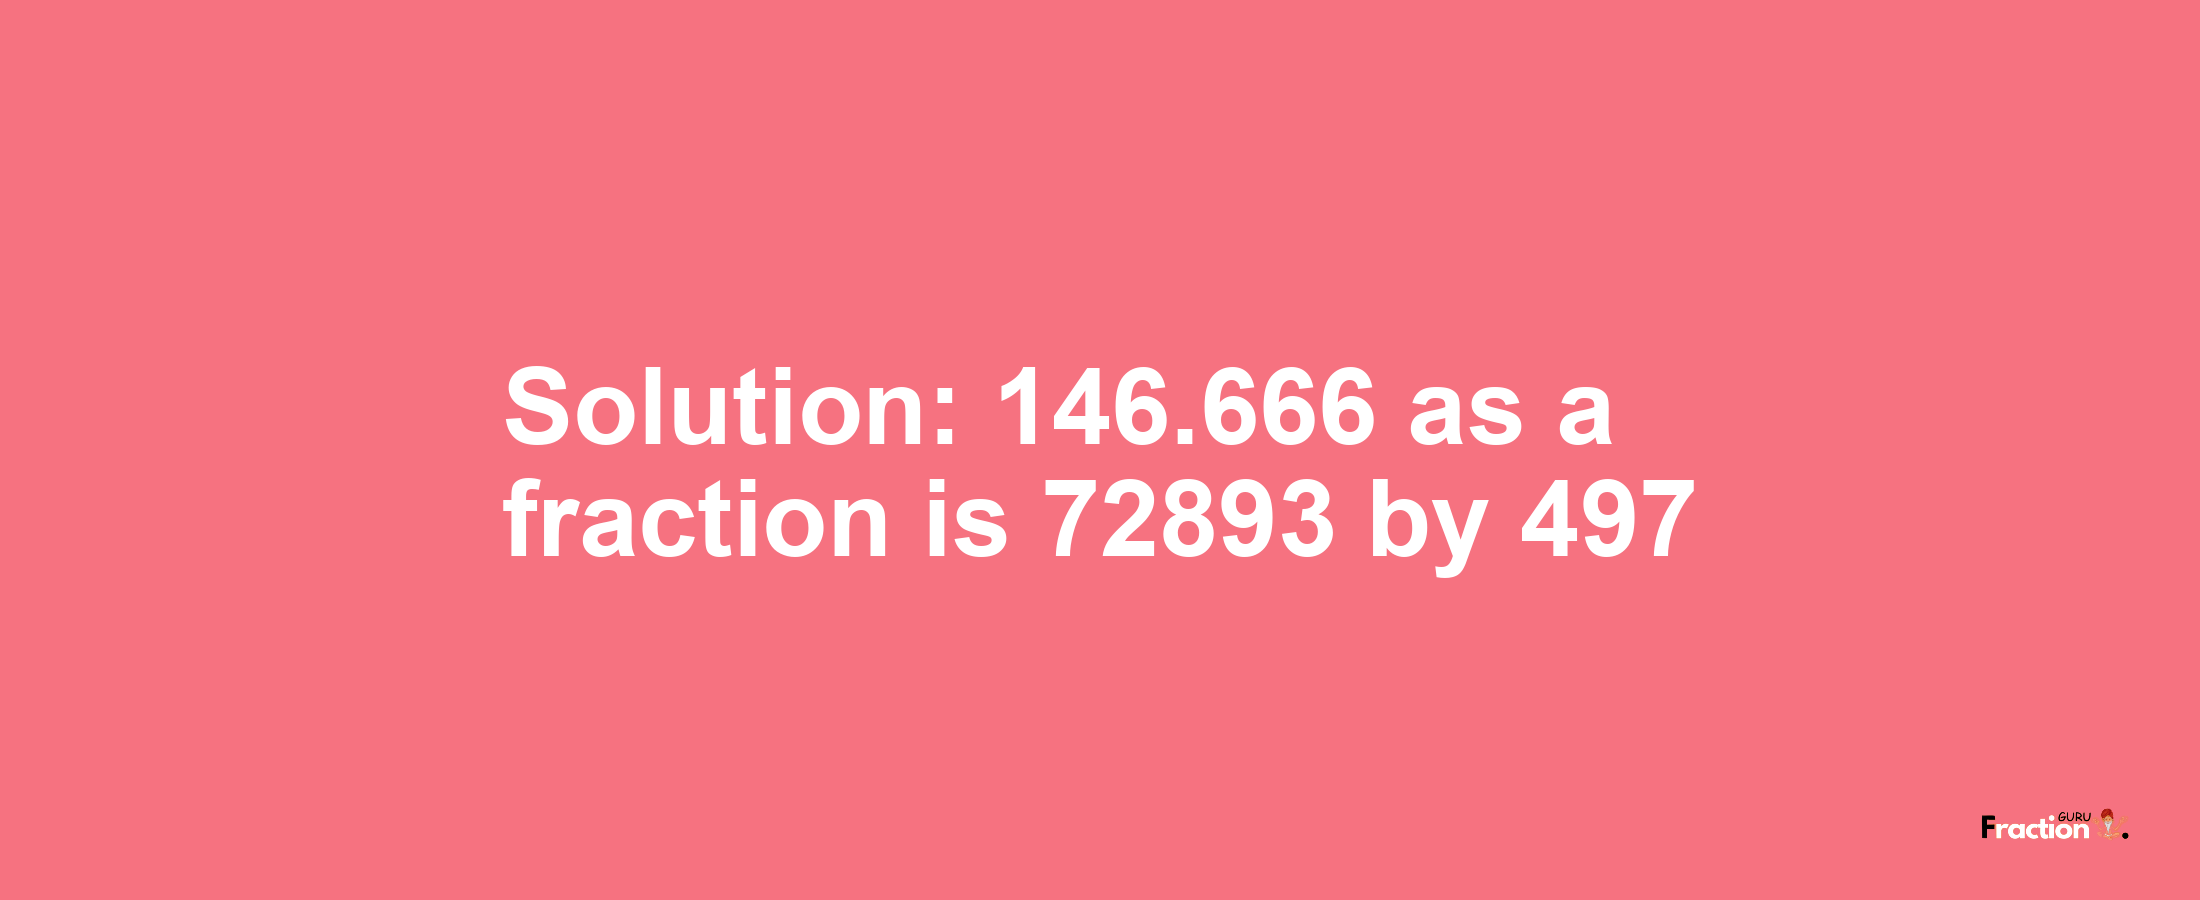 Solution:146.666 as a fraction is 72893/497